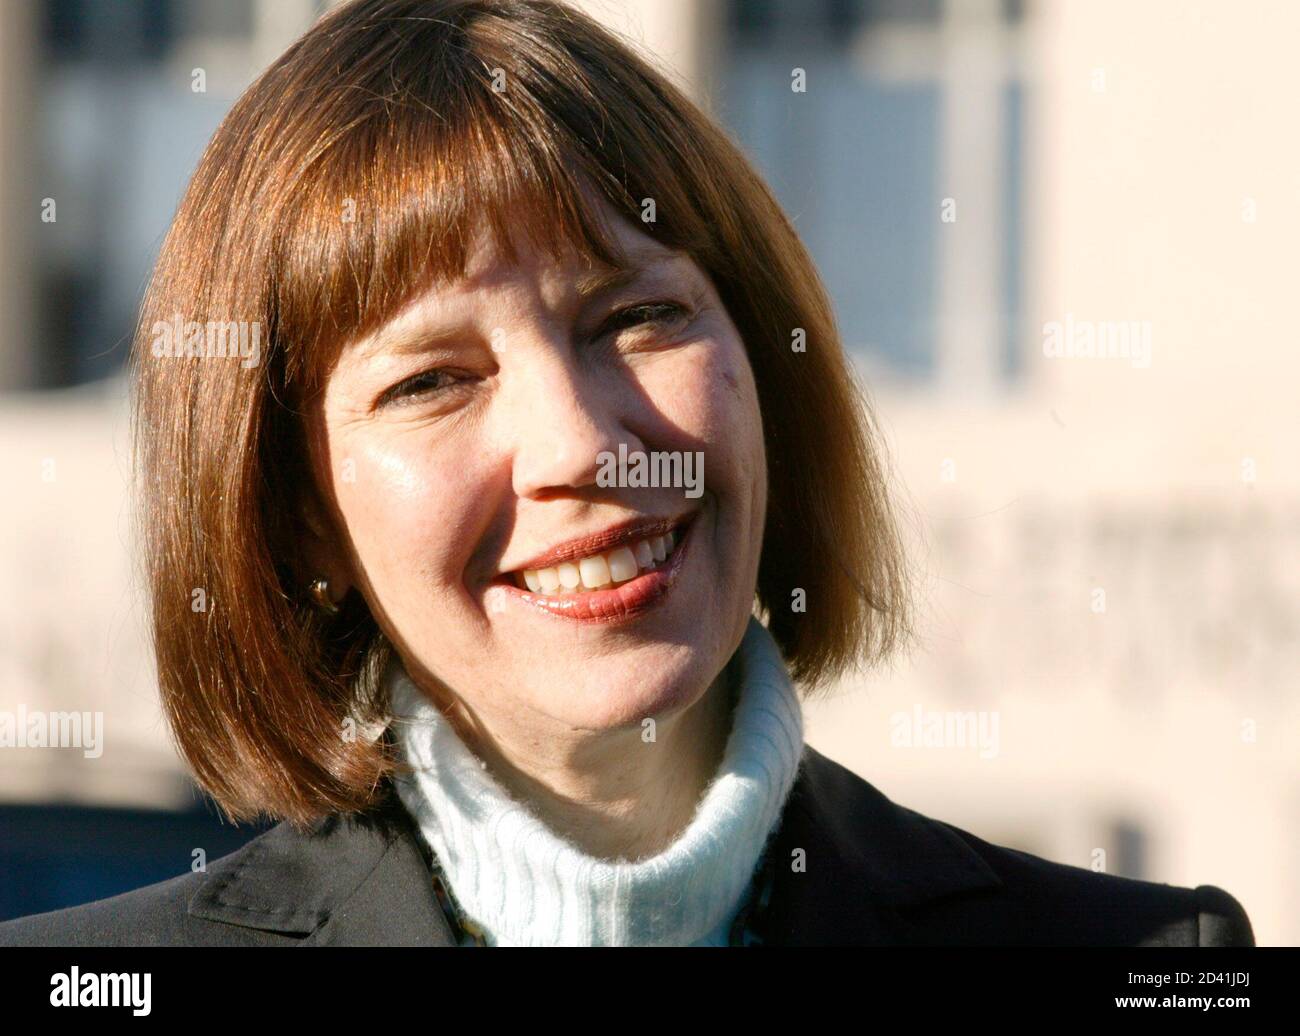 New York Times reporter Judith Miller smiles after she and Time Magazine reporter Matthew Cooper's appearance at the U.S. Court of Appeals for the District of Columbia in Washington, December 8, 2004. Cooper is one of two reporters facing up to 18 months in jail for refusing to testify about their contacts with confidential sources relating to the story about the unnamed Bush administration sources about the release of the name of CIA official Valerie Plame to the media 16 months ago. REUTERS/Yuri Gripas  YG Stock Photo